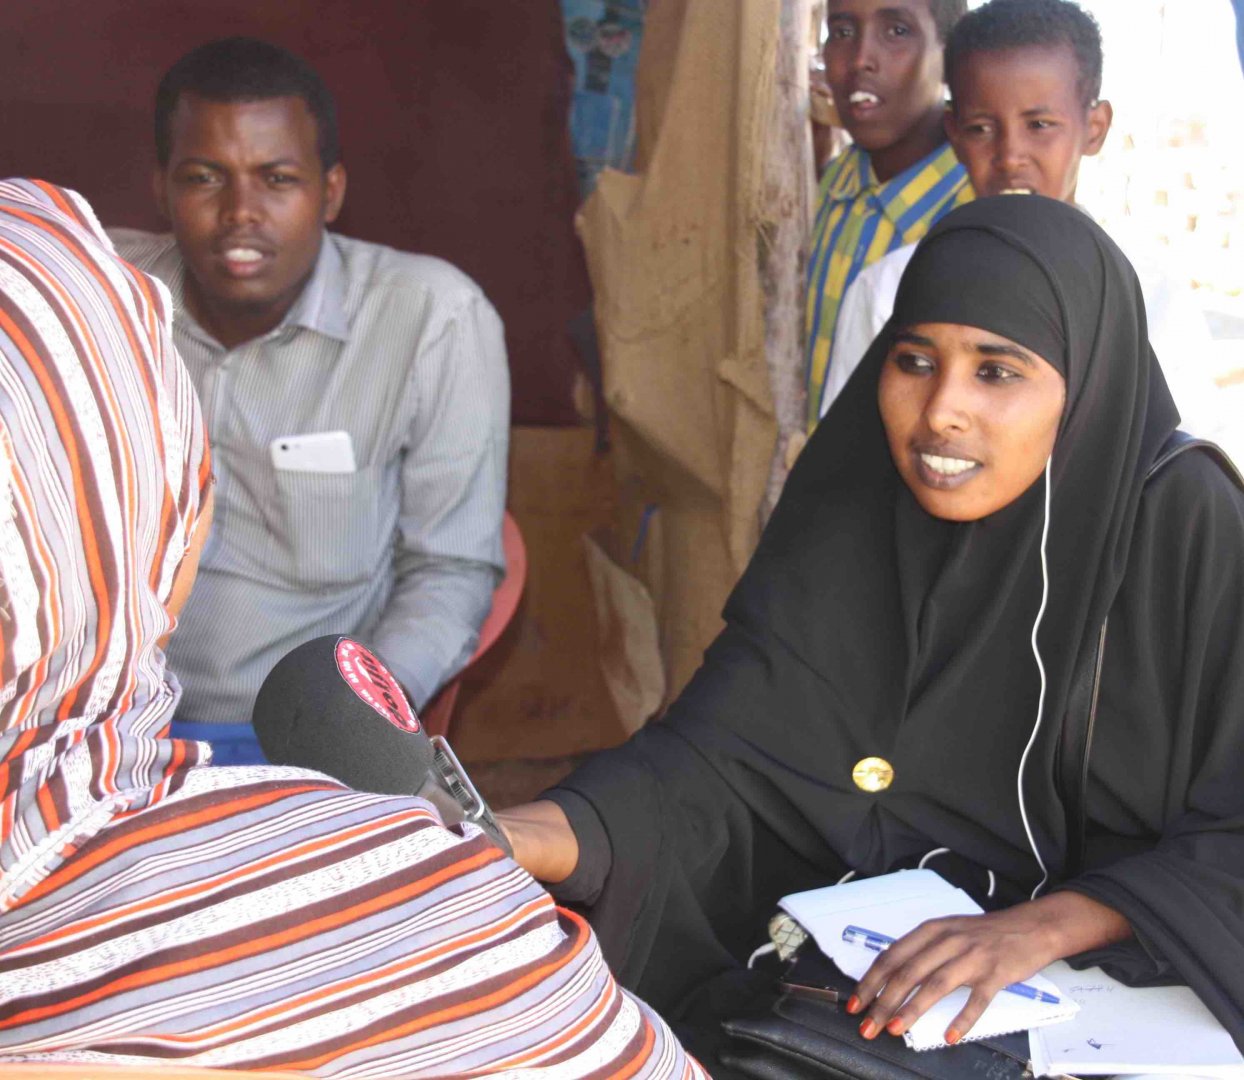 A Somali woman dressed in black holds a recorder up to another woman.